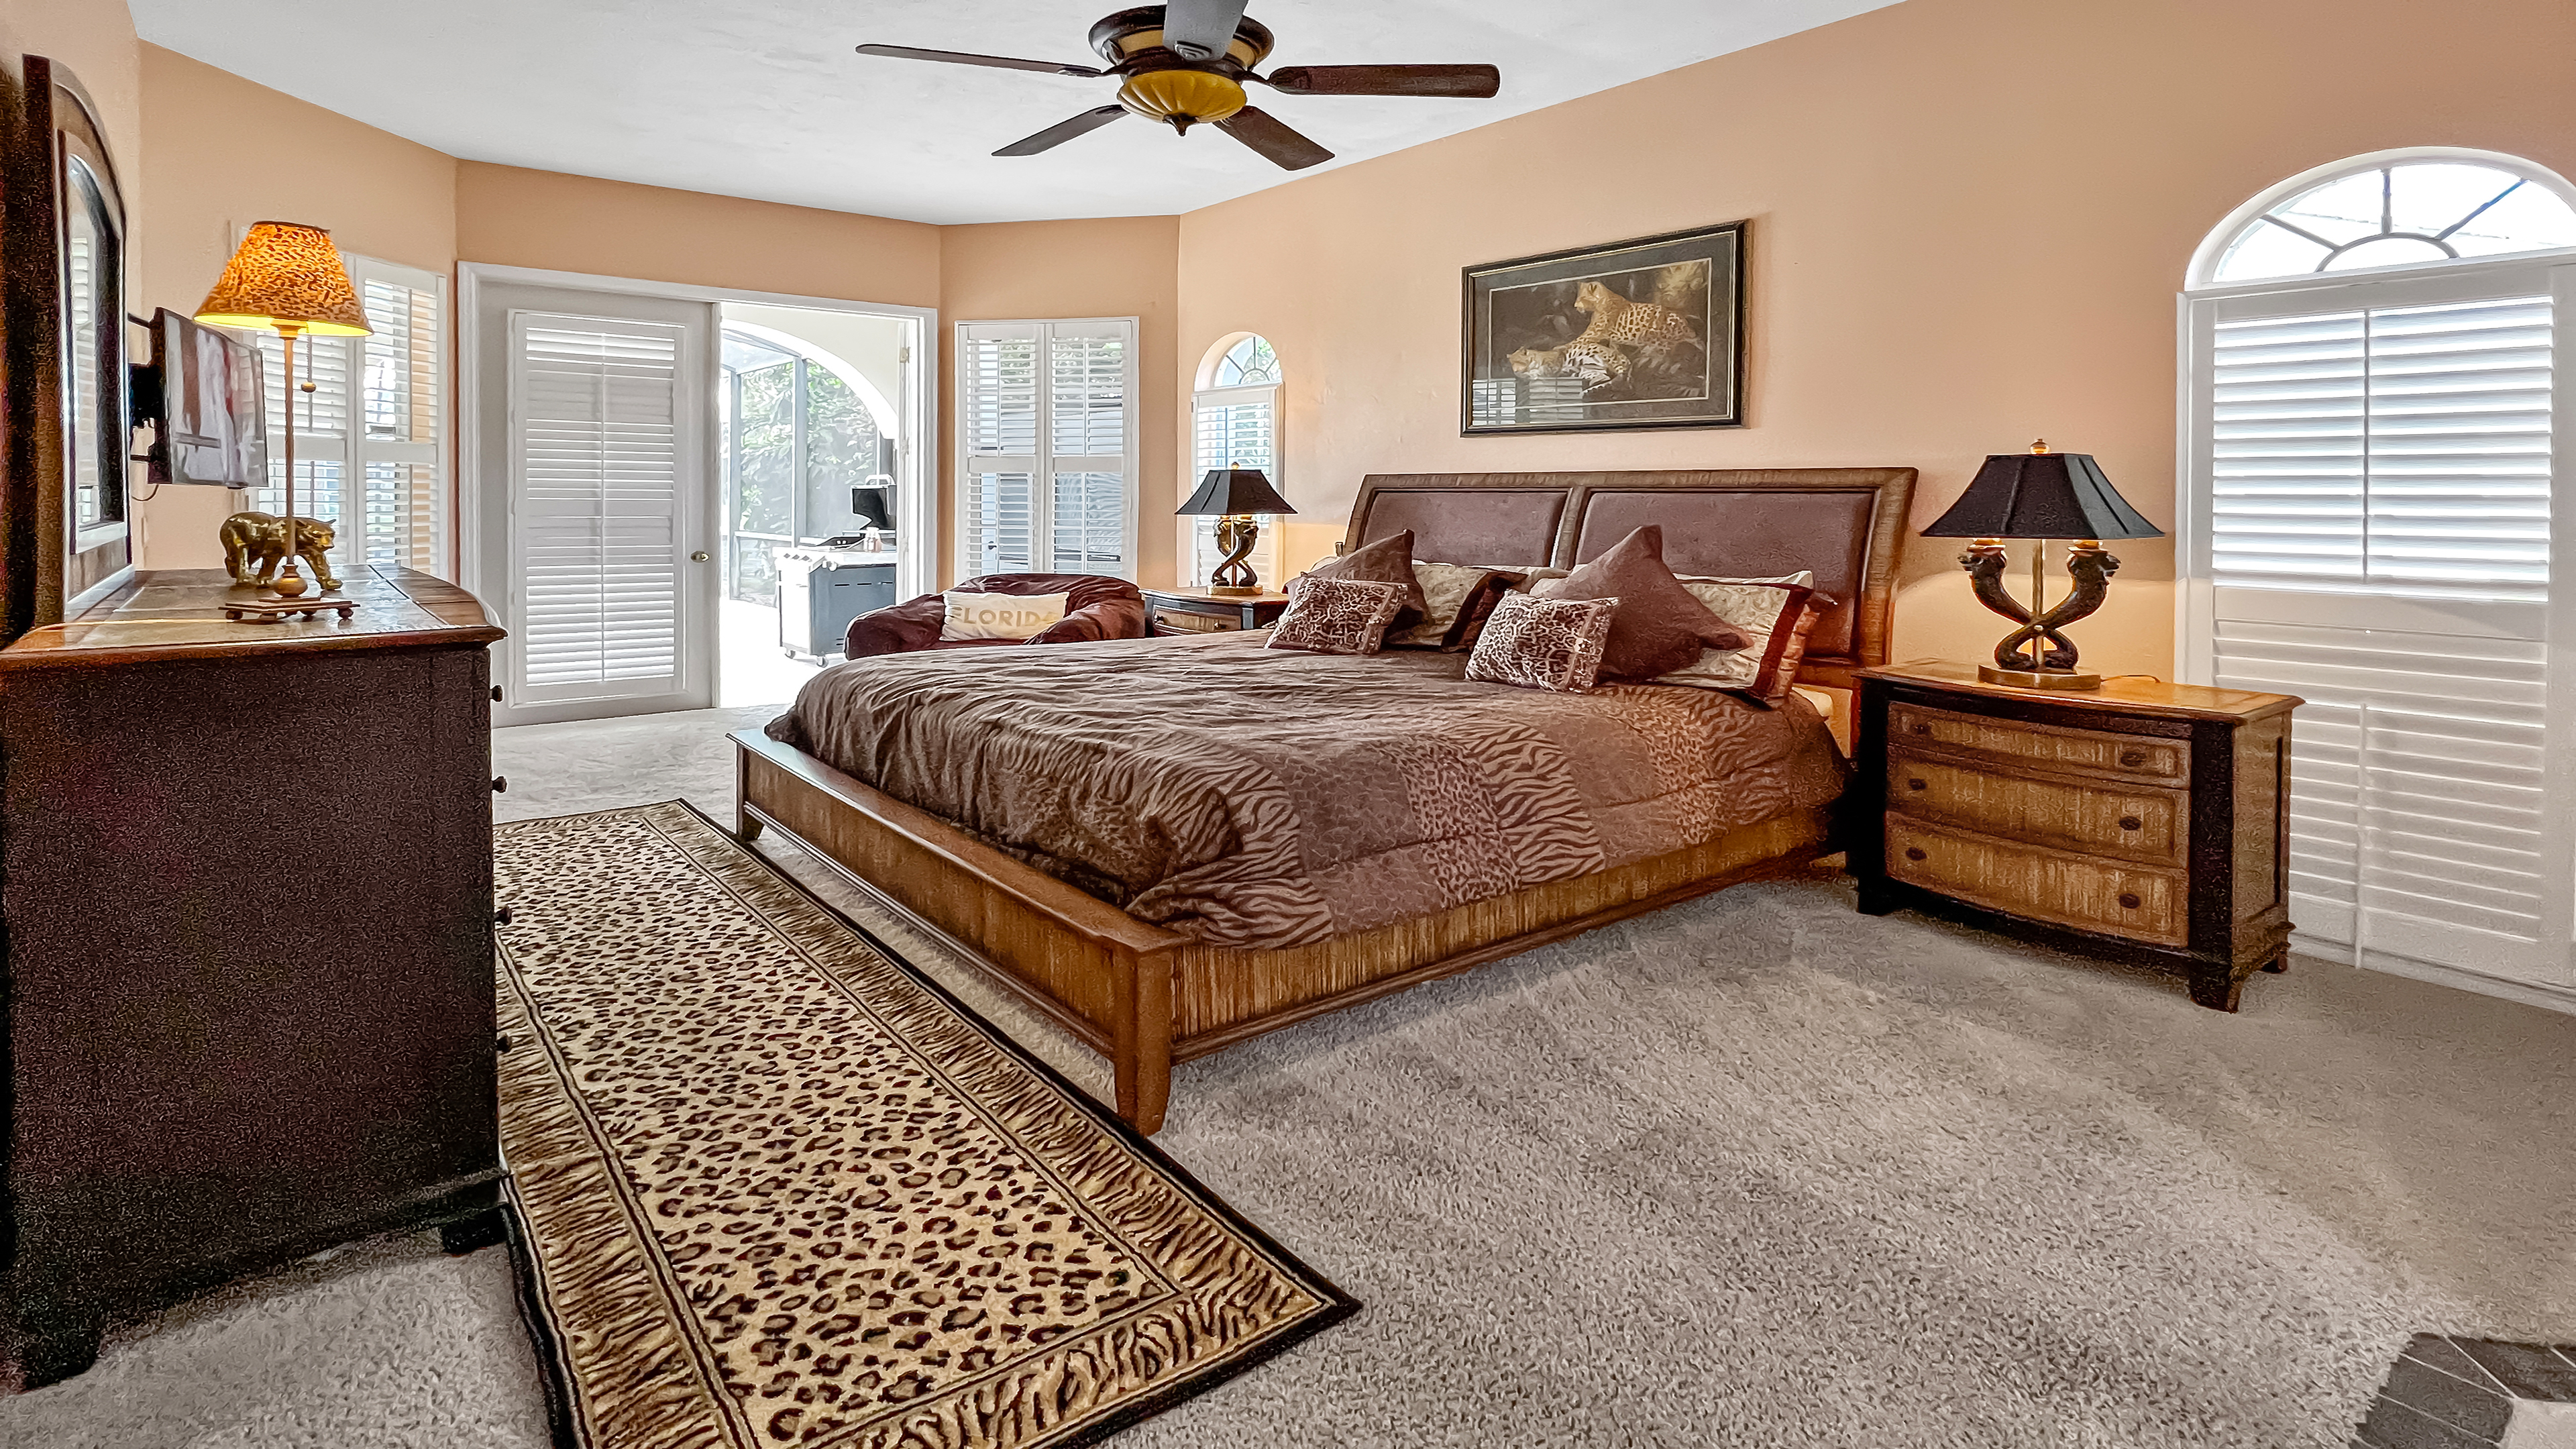 The master bedroom features a King size bed